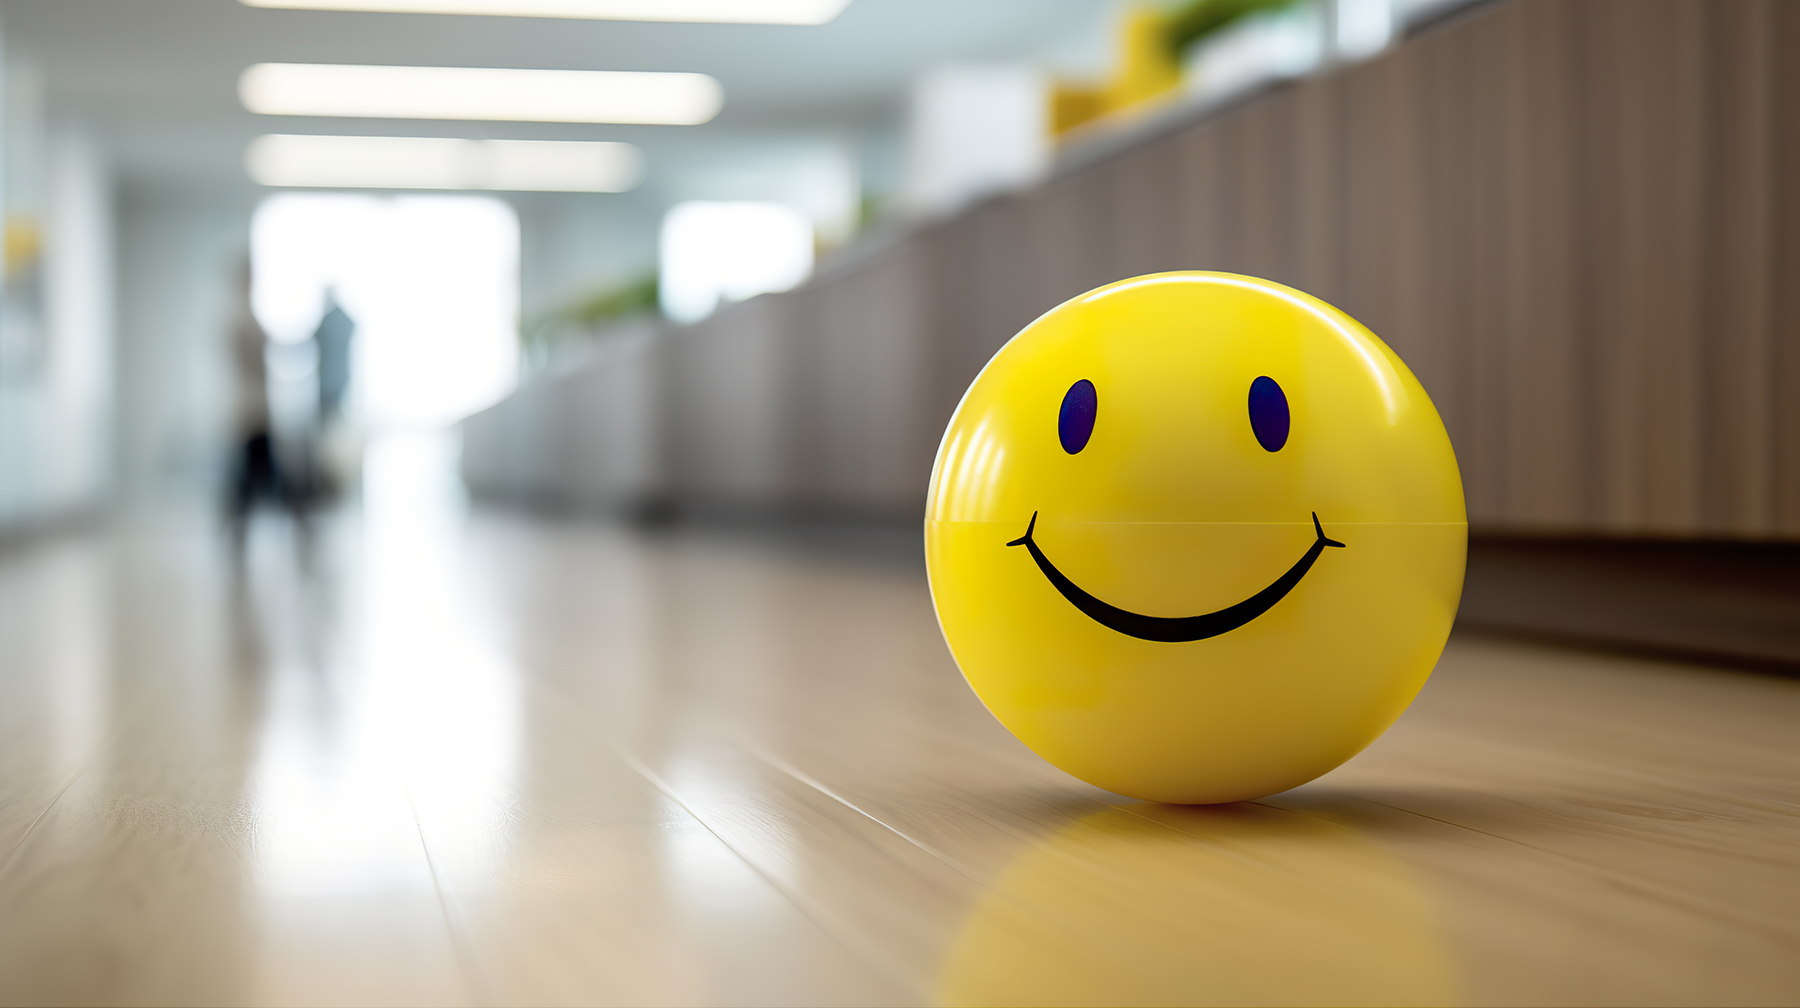 yellow ball with smiling face in foreground of office space on floor